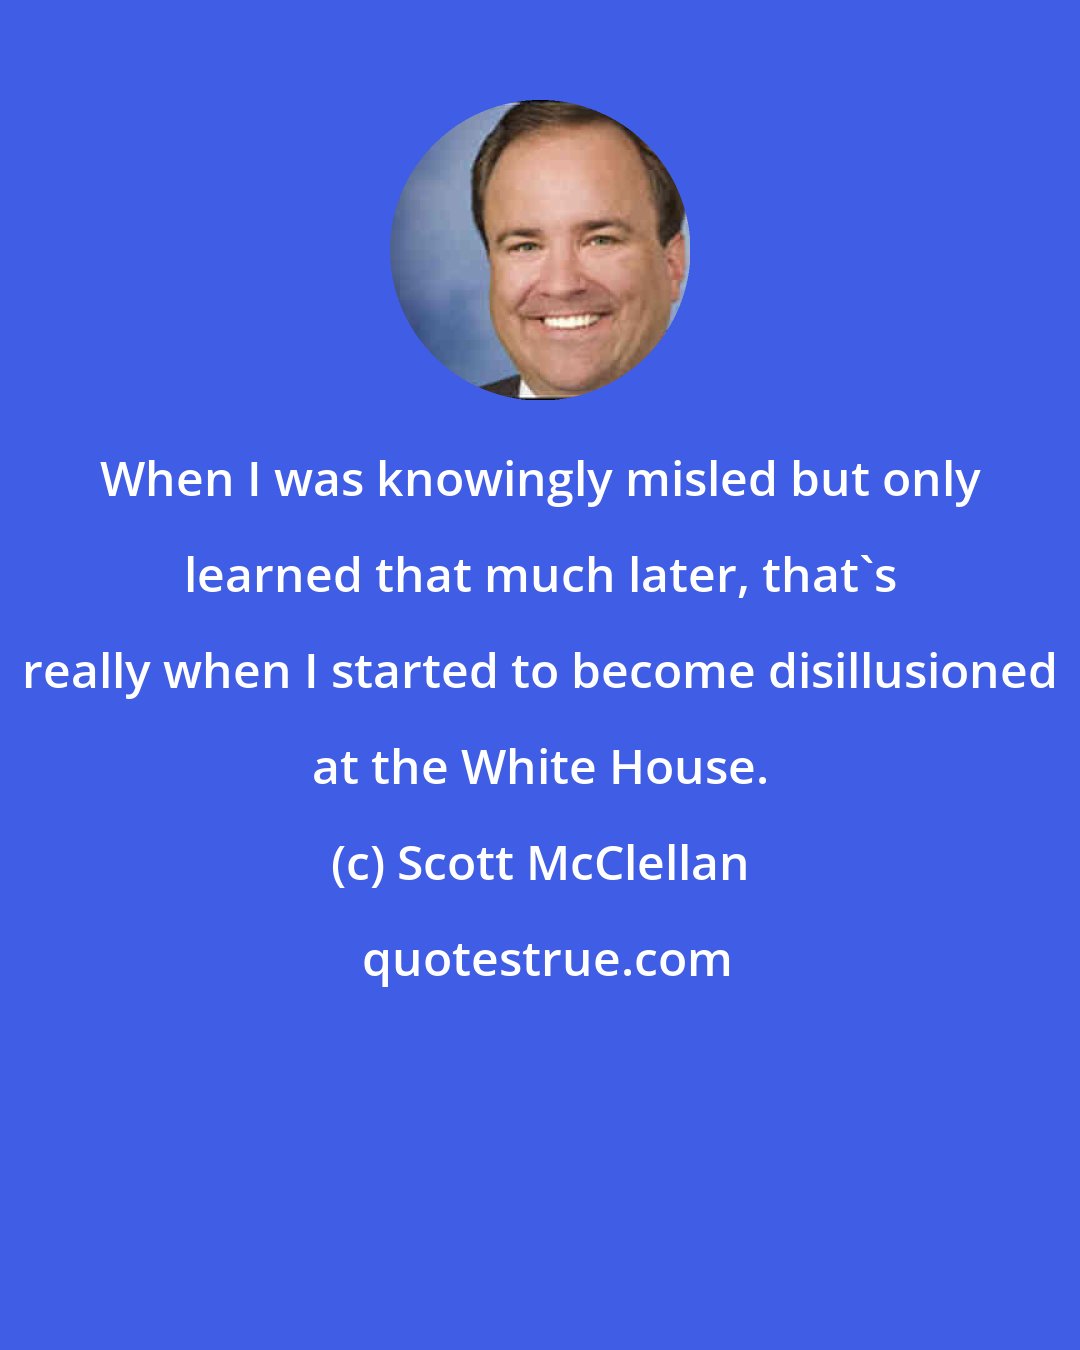 Scott McClellan: When I was knowingly misled but only learned that much later, that's really when I started to become disillusioned at the White House.